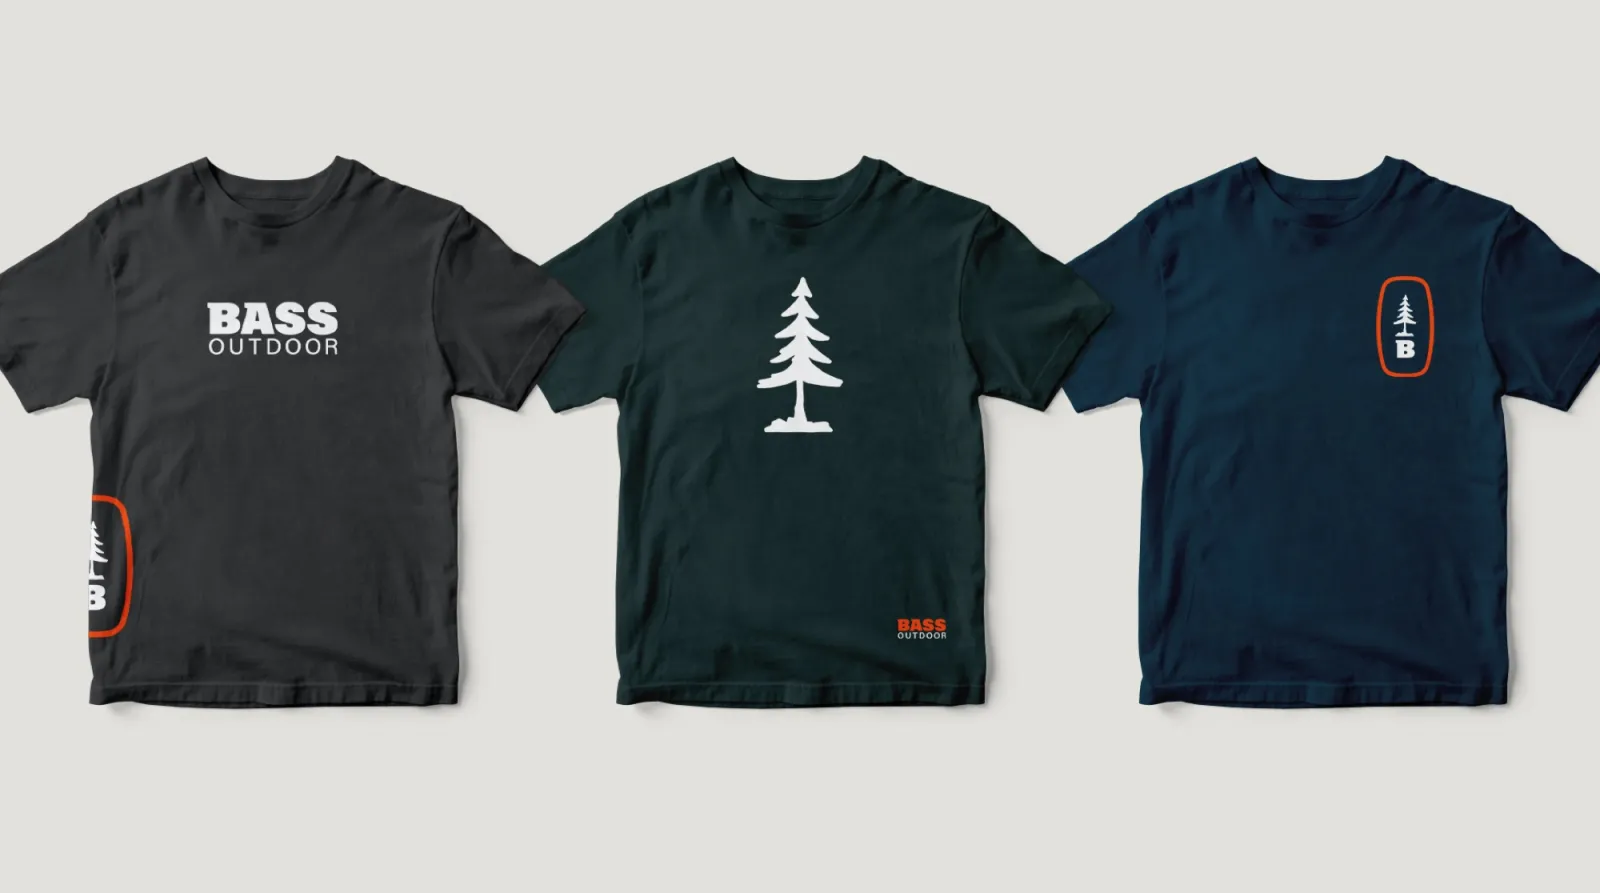 Building a brand to democratize the outdoors